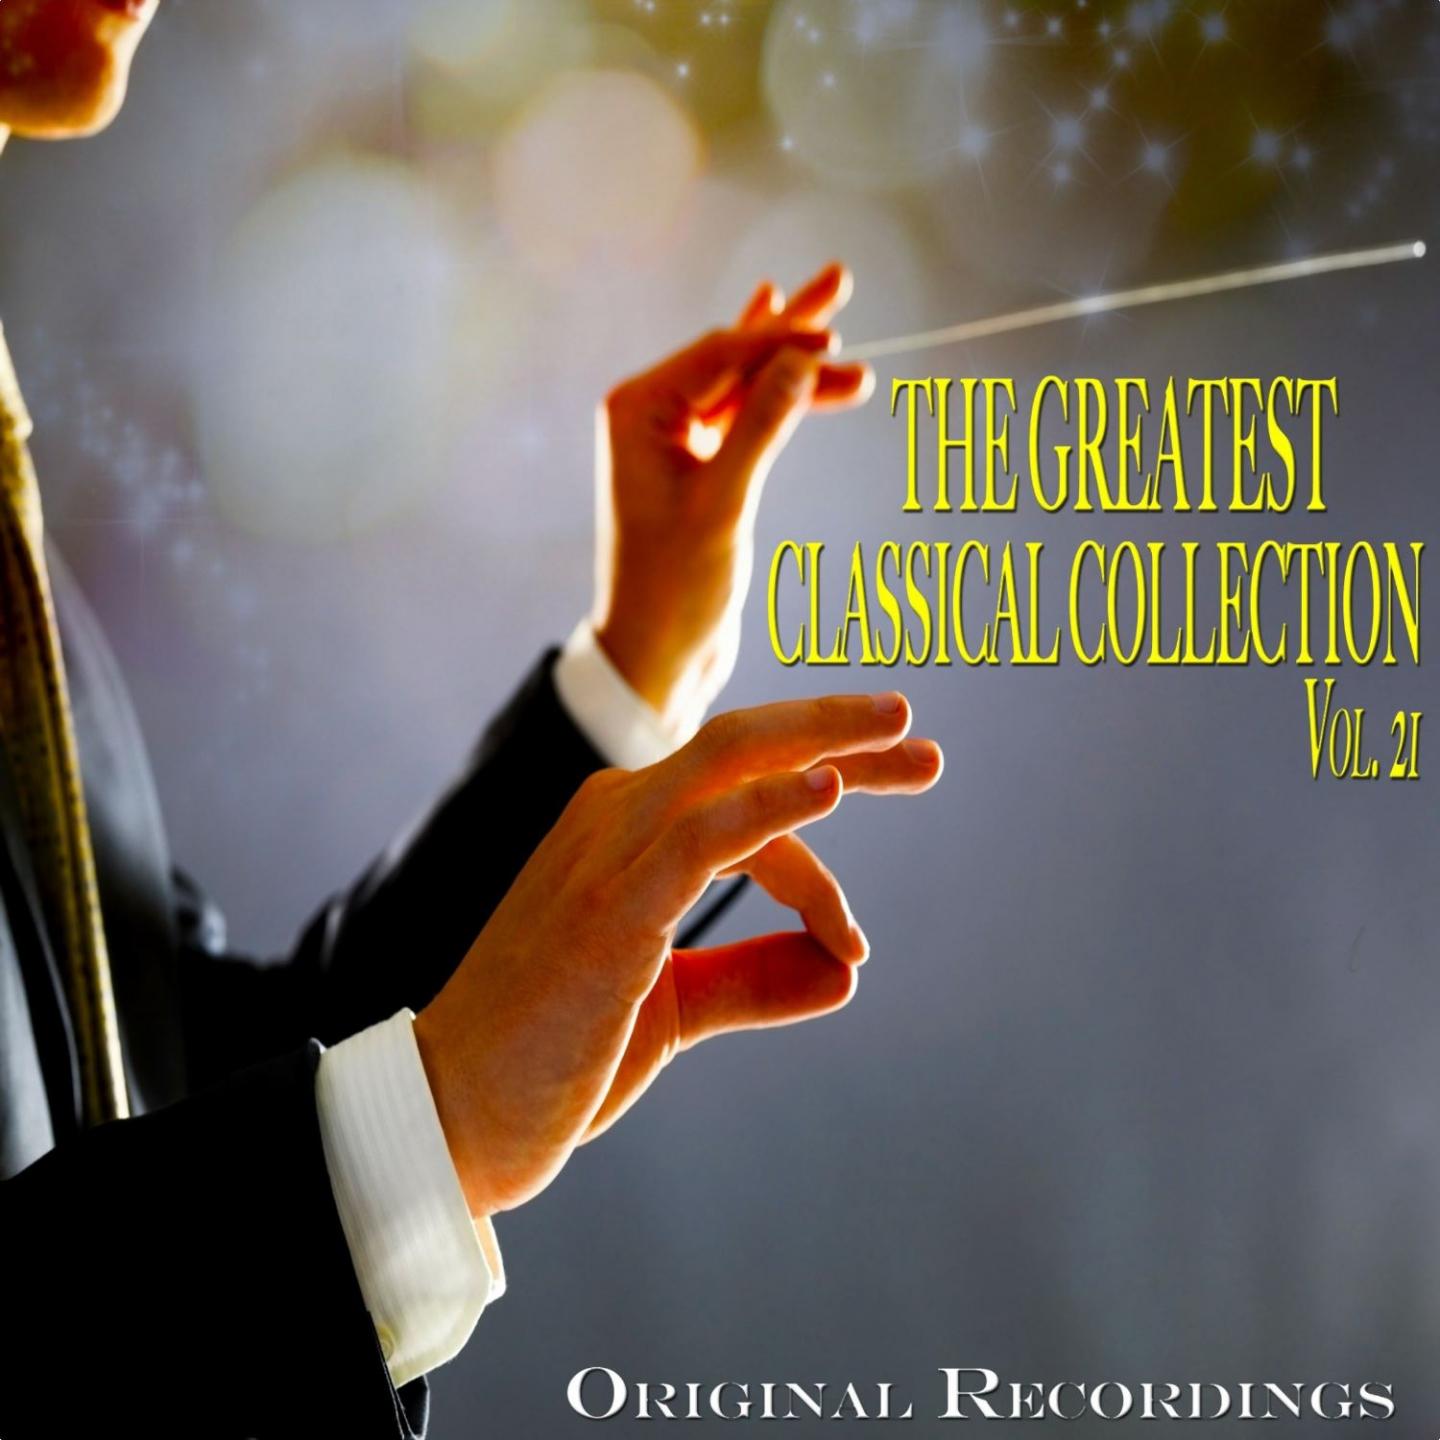 The Greatest Classical Collection Vol. 21